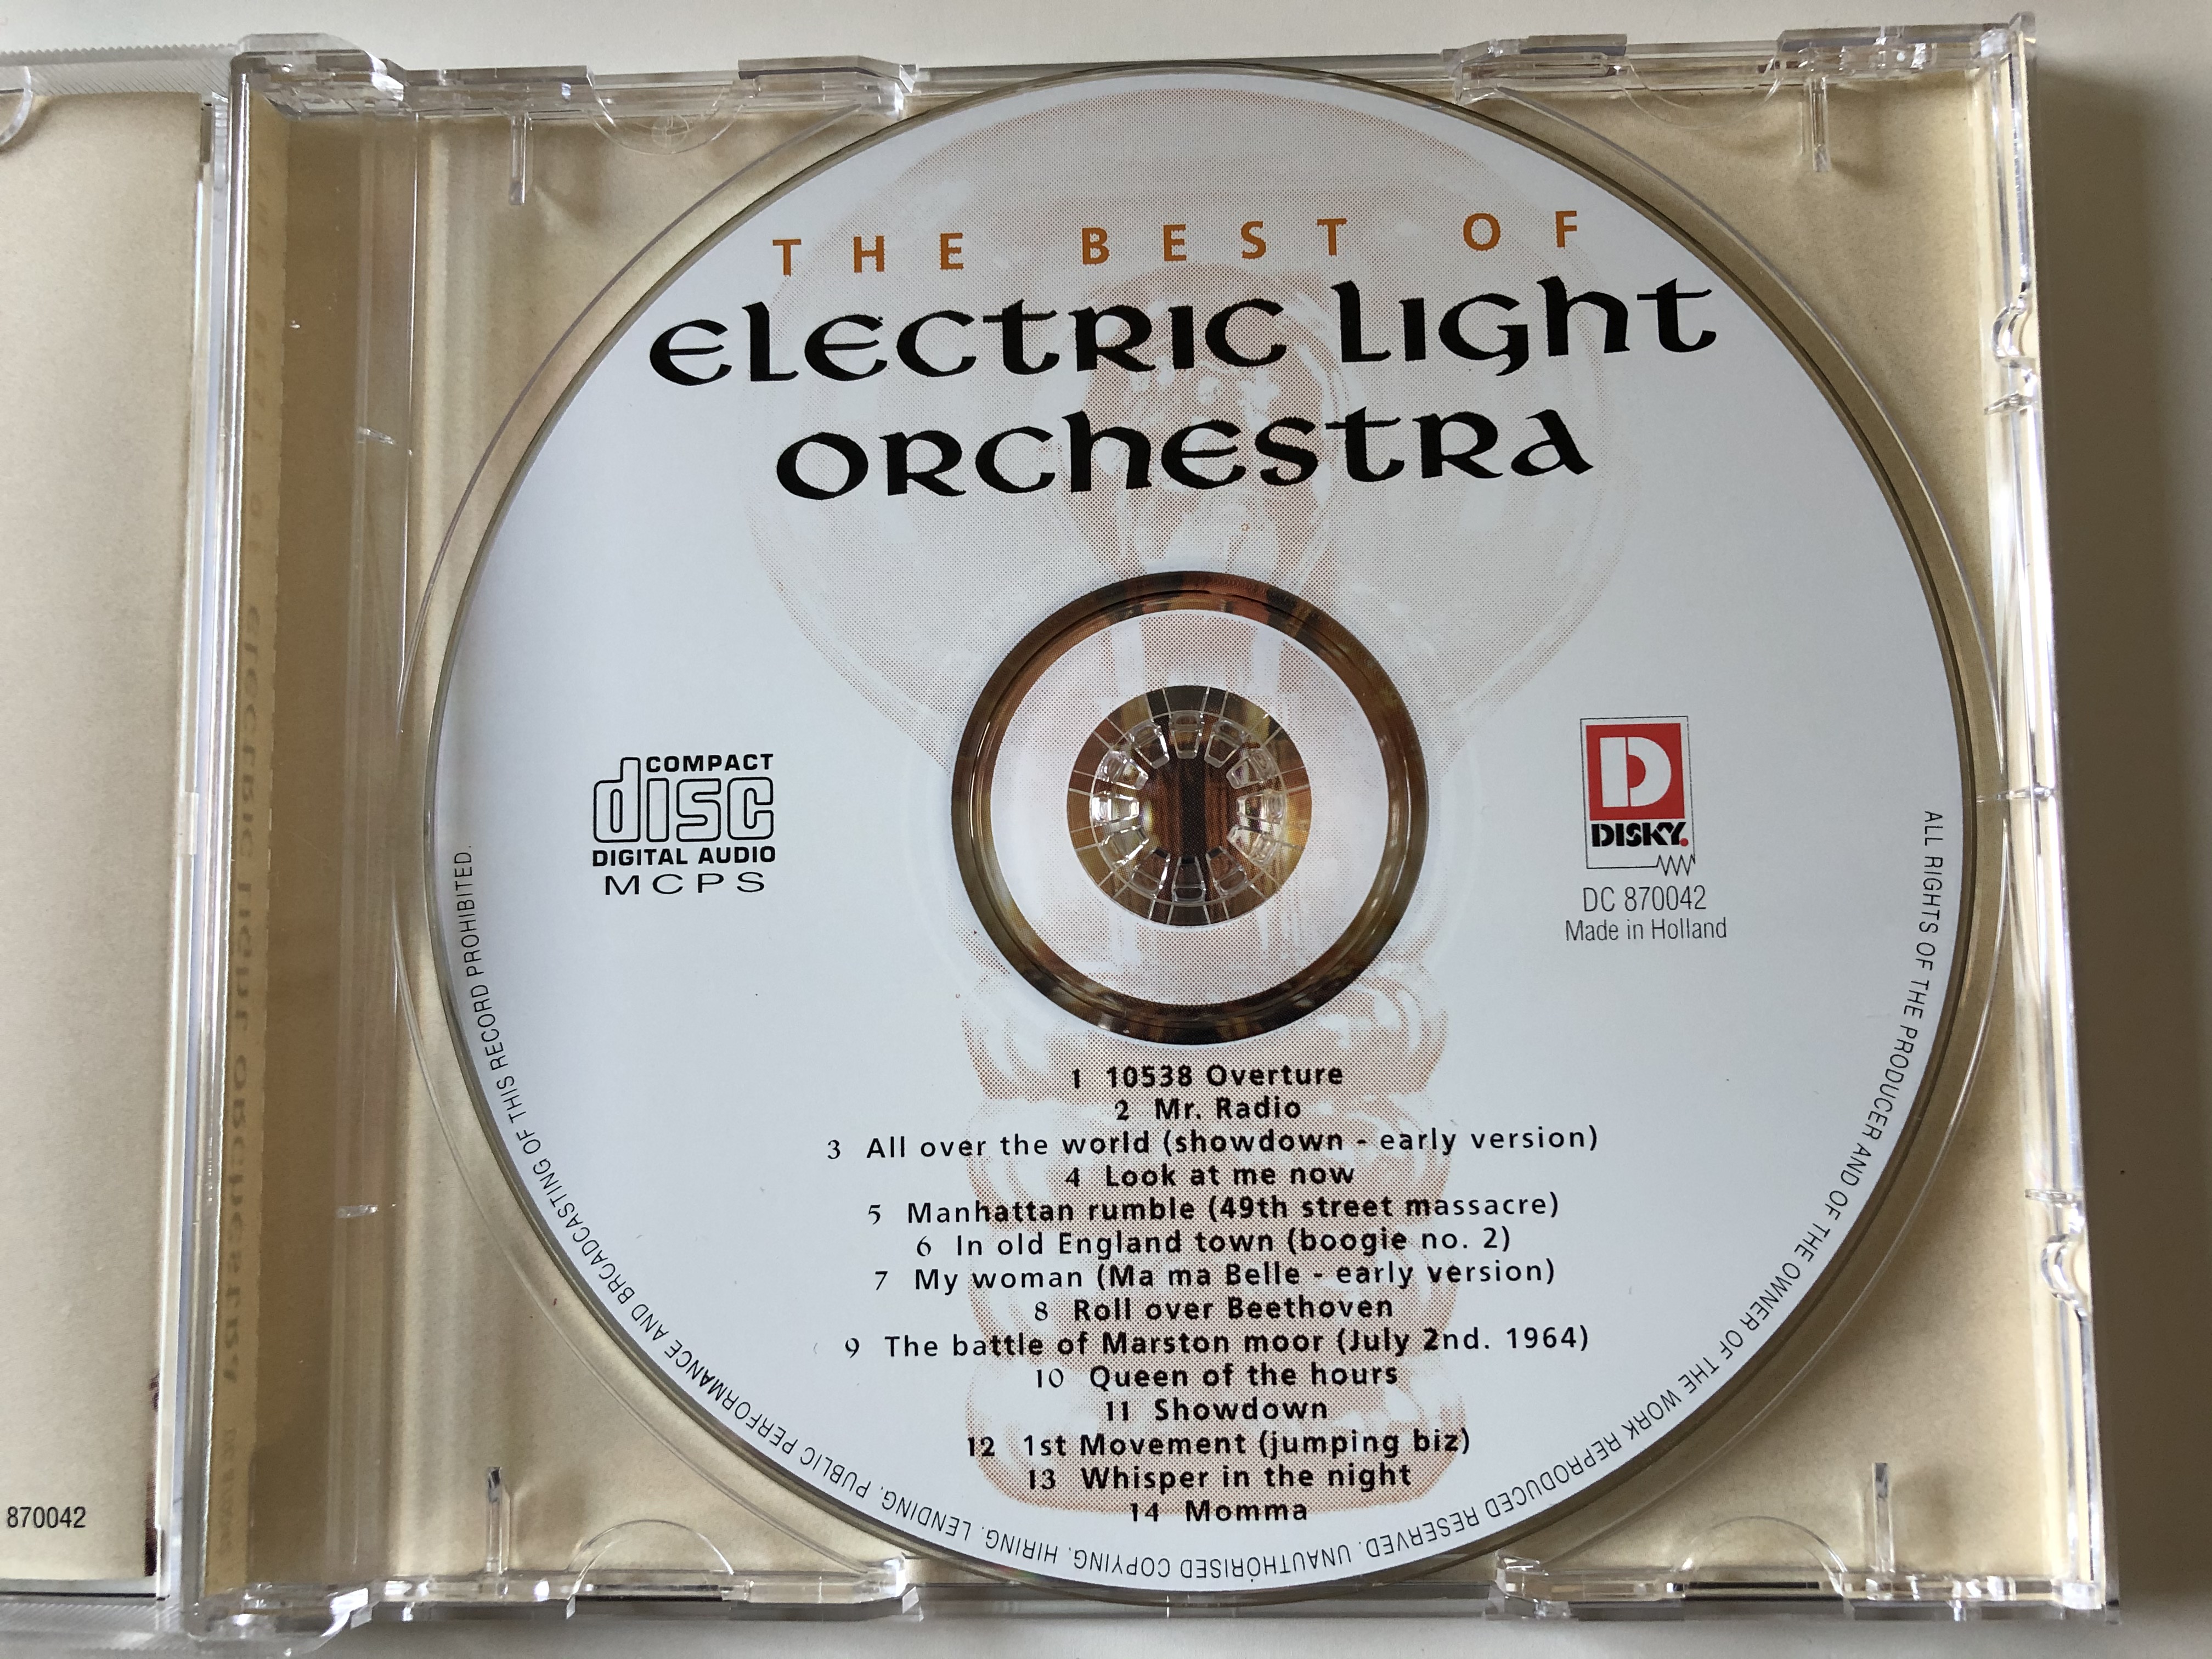 the-best-of-electric-light-orchestra-roll-over-beethoven-10538-overture-mr.-radio-look-at-me-now-disky-audio-cd-1996-dc-870042-3-.jpg